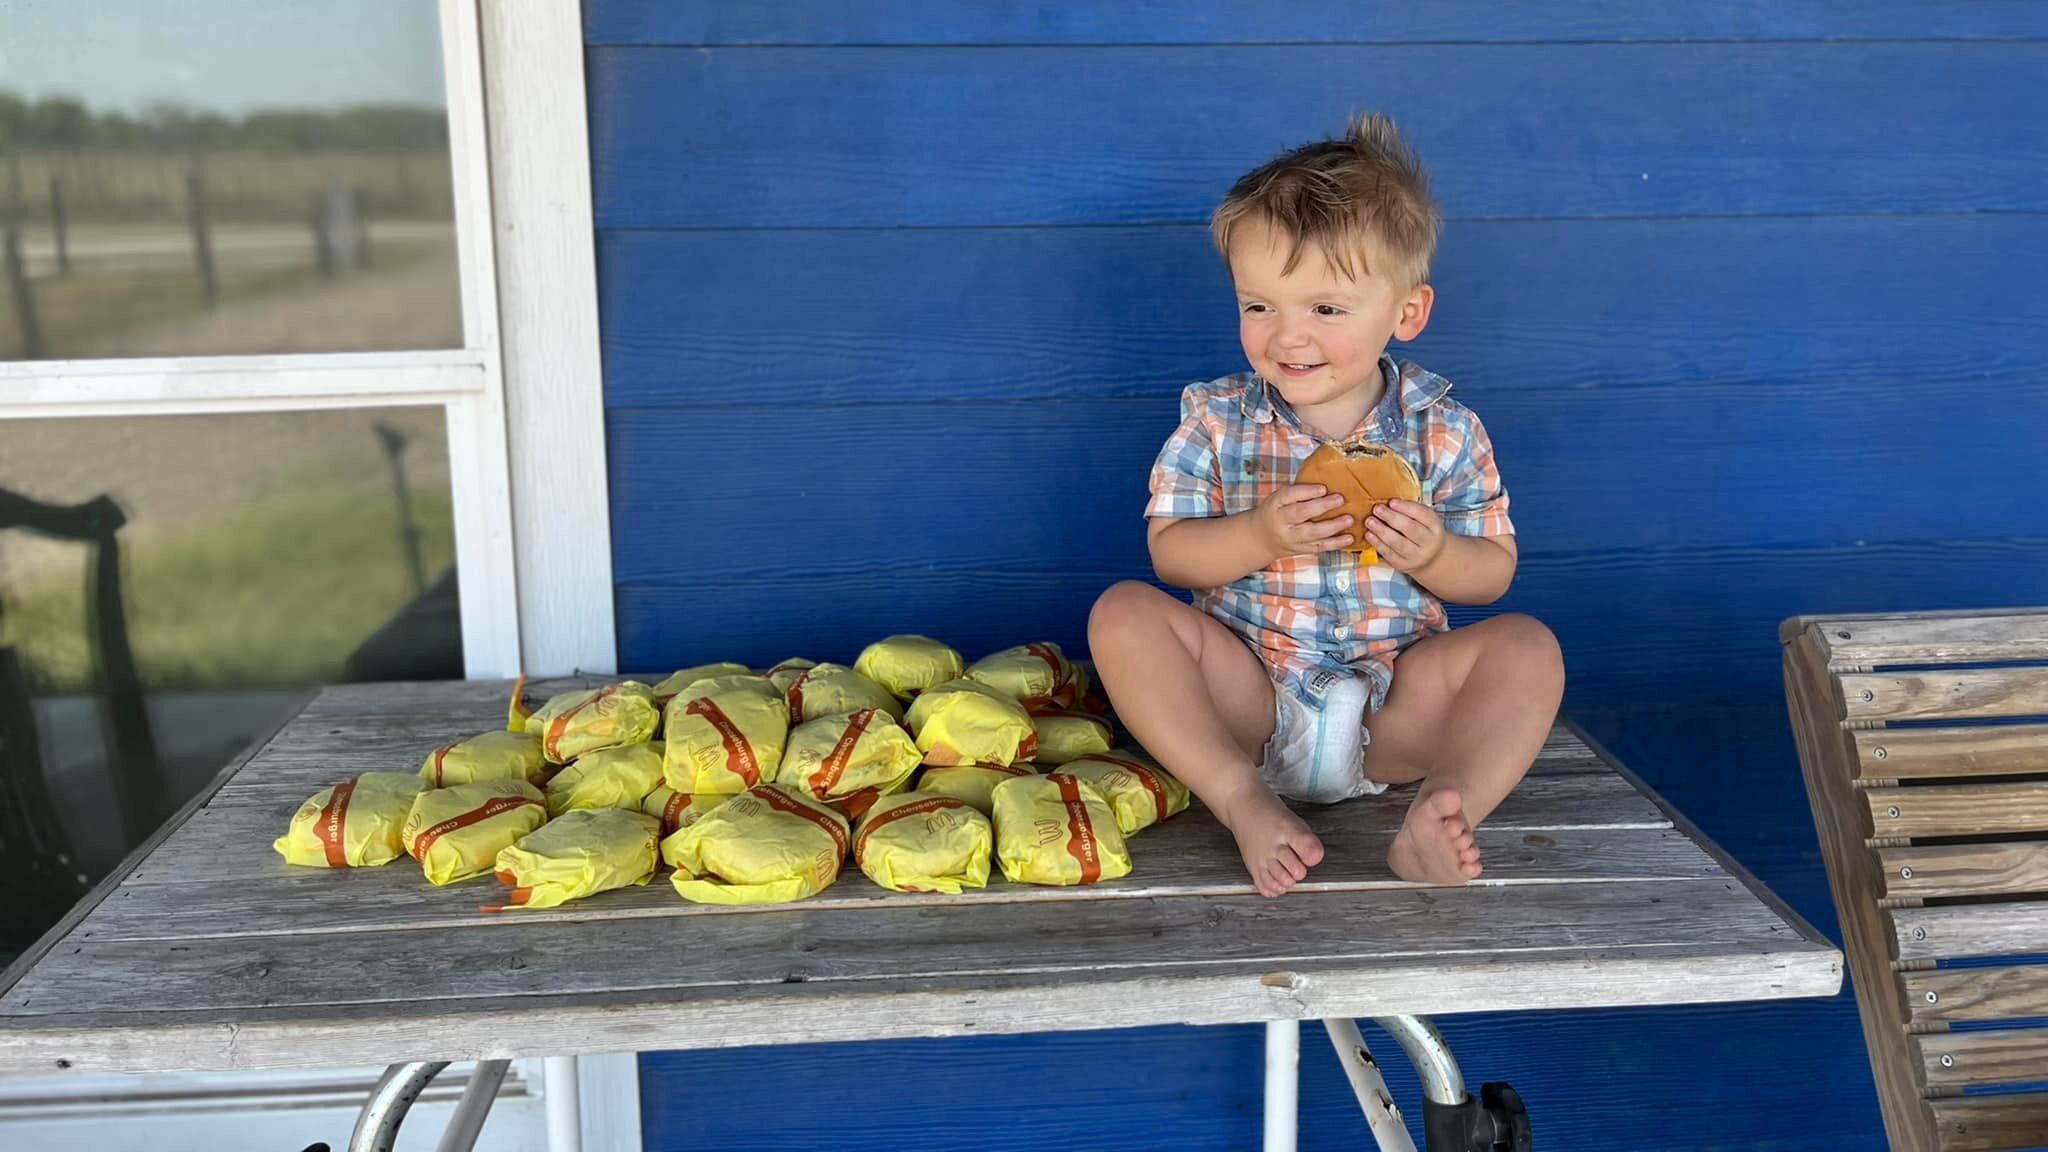 Order Up! Texas 2-Year-Old Buys Dozens of Cheeseburgers Using Mom's
Phone